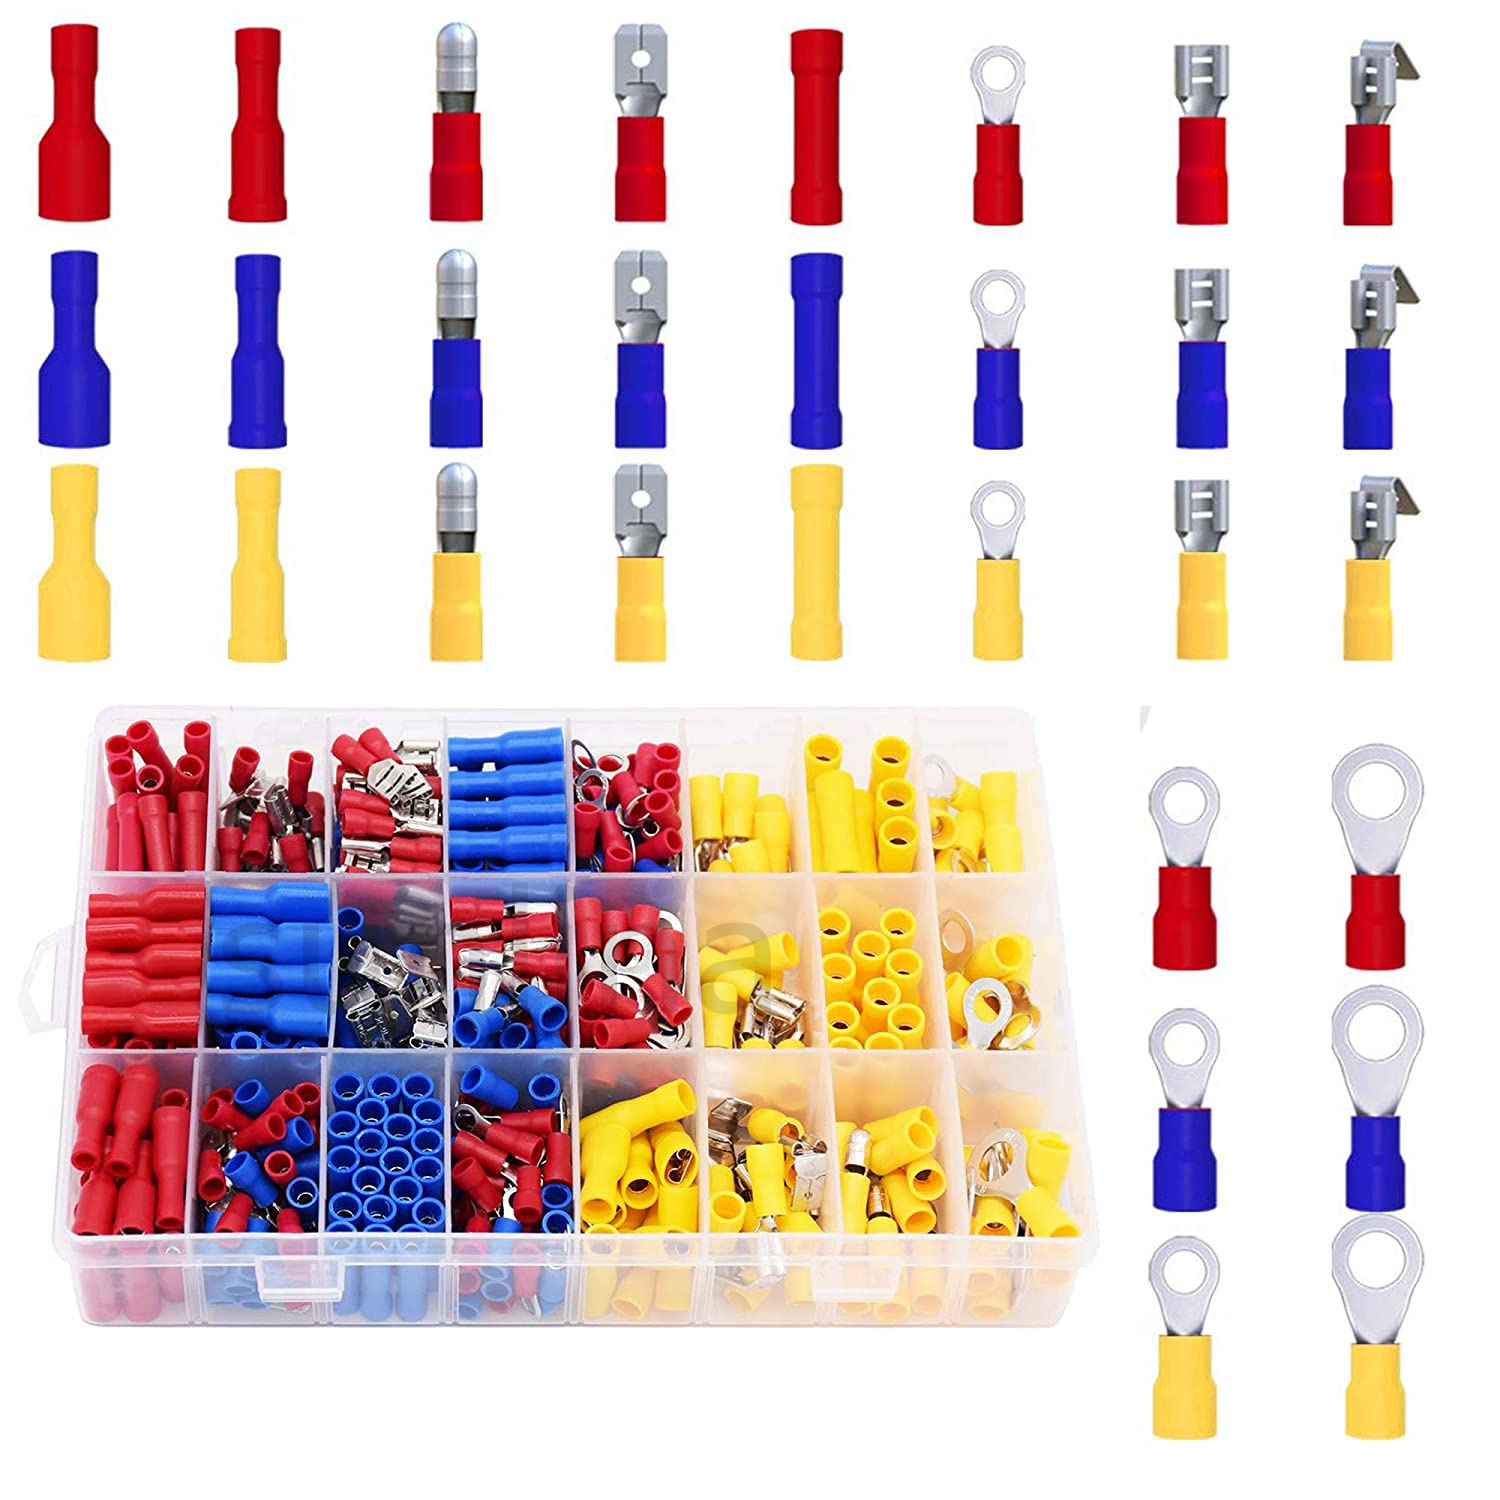 480PCS Insulated Assorted Electrical Wire Terminals Crimp Connectors Butt Spade Ring Fork Set 